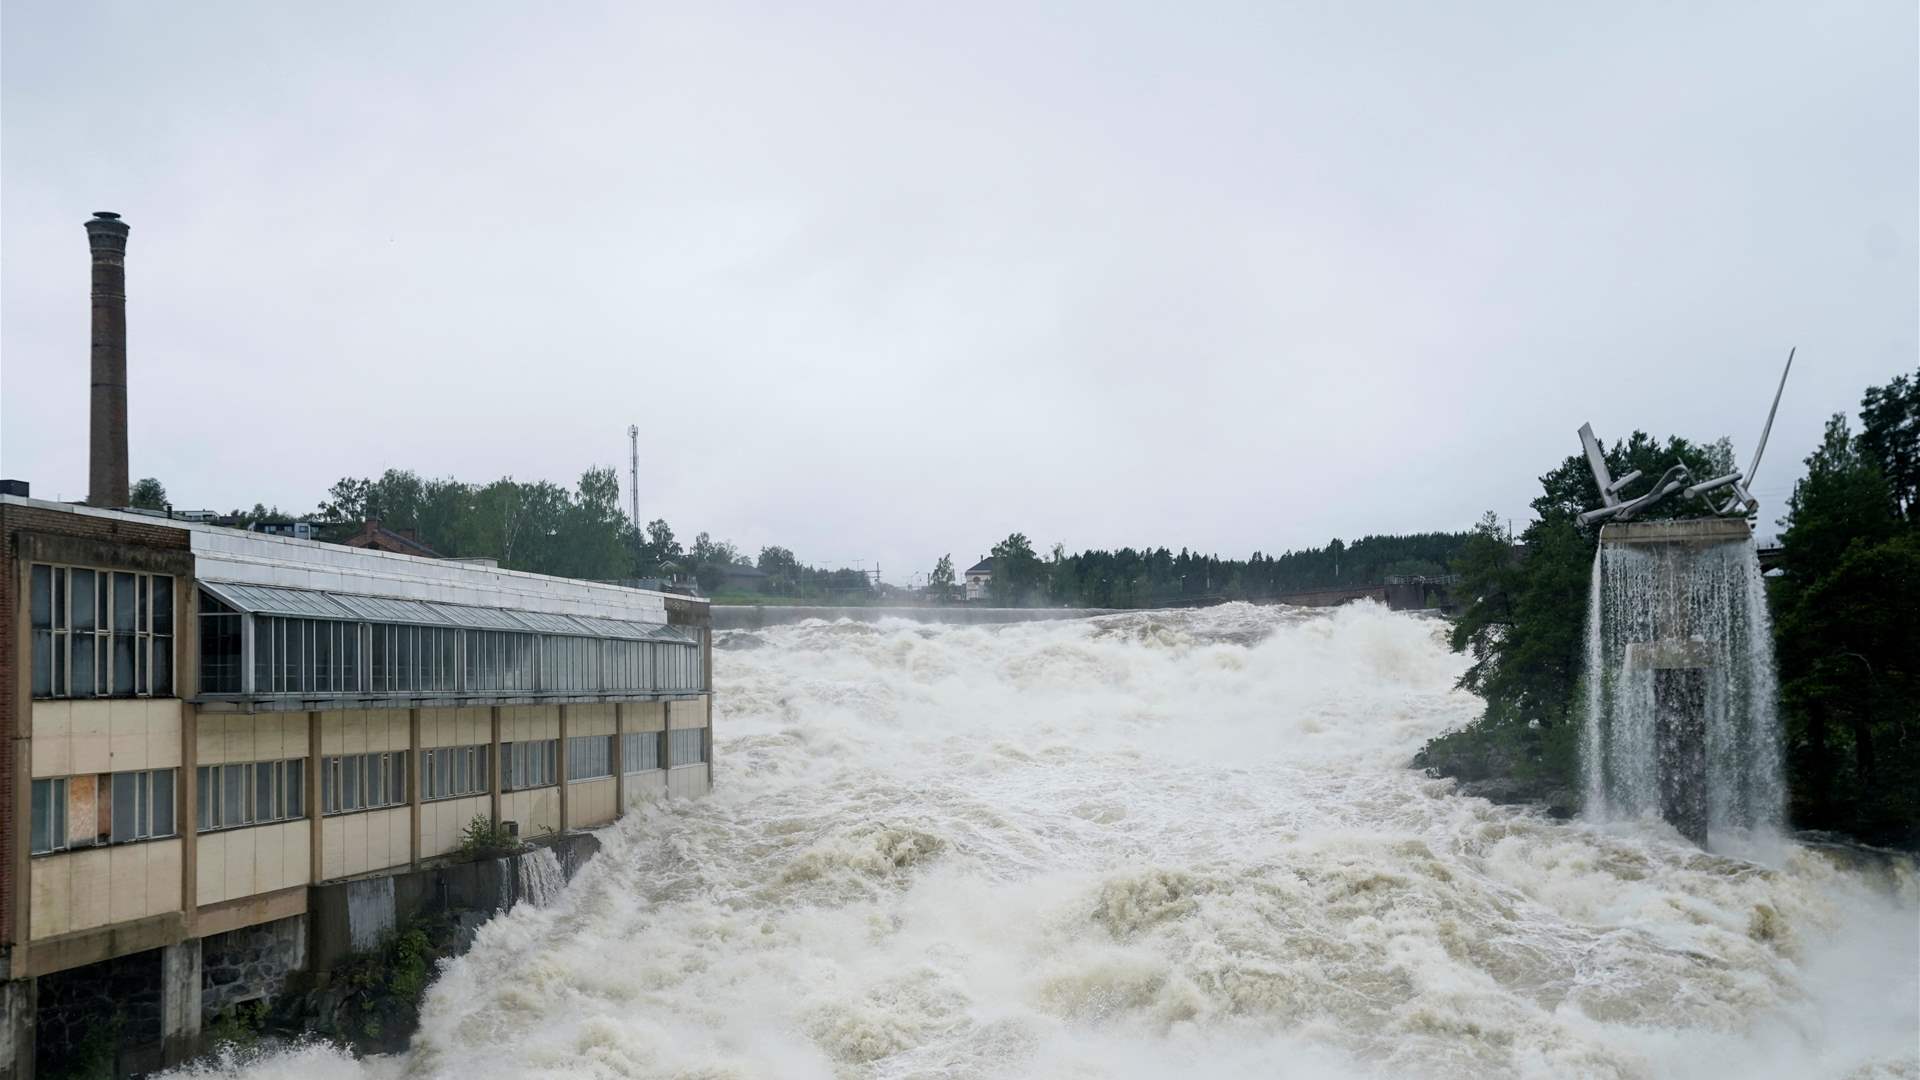 Norway prepares for more flooding, evacuates people from flooded areas